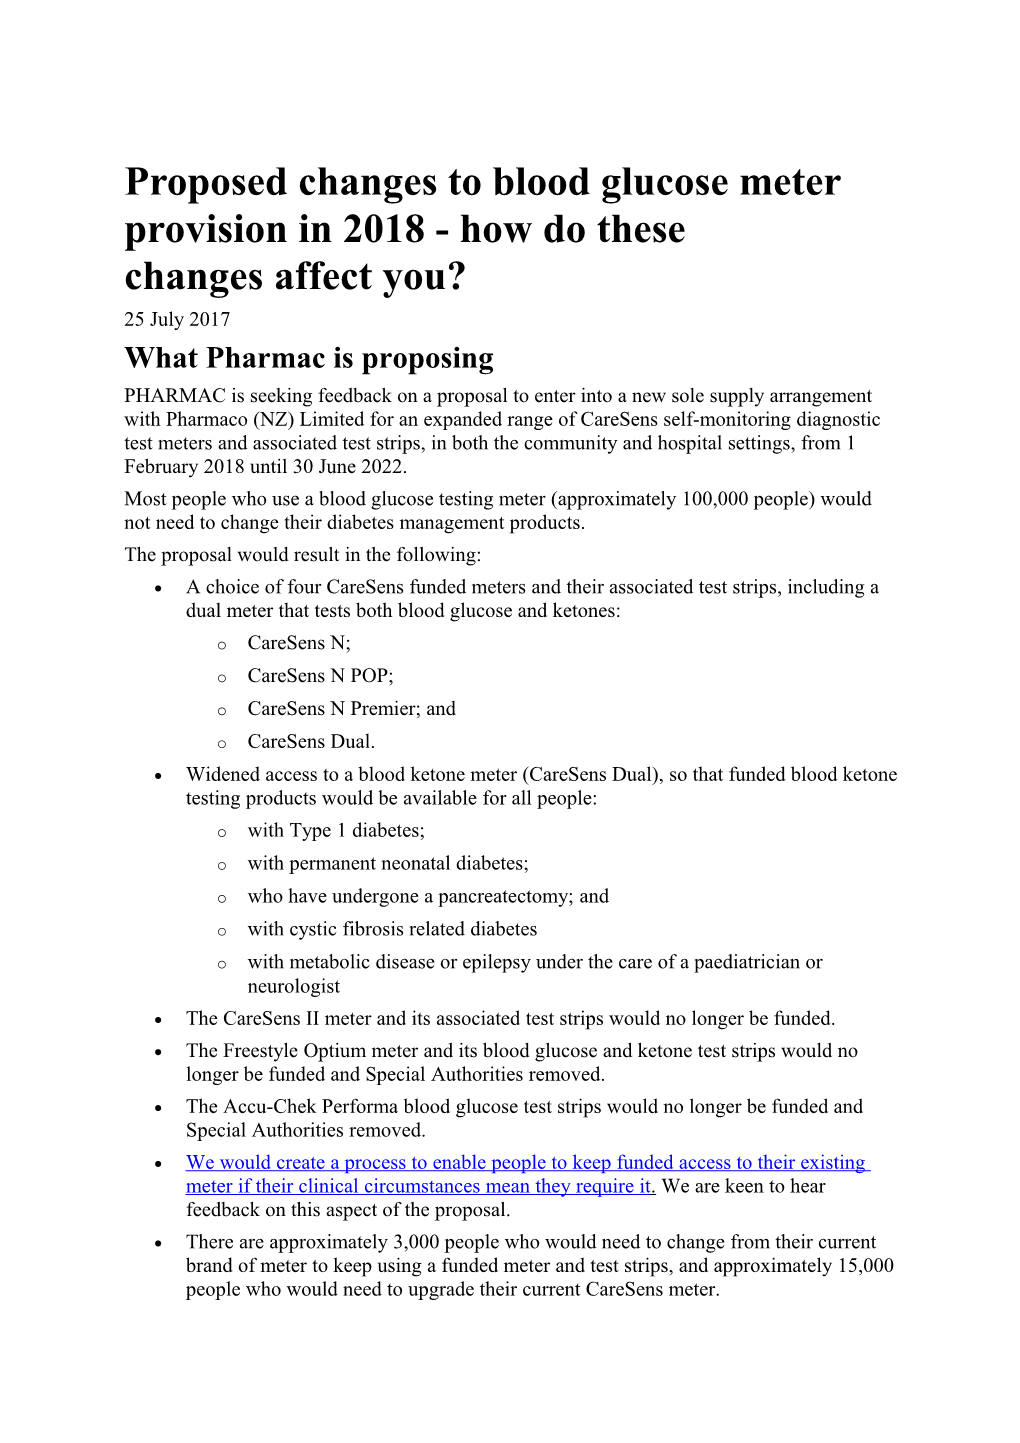 Proposed Changes to Blood Glucose Meter Provisionin 2018 - How Dothese Changesaffect You?